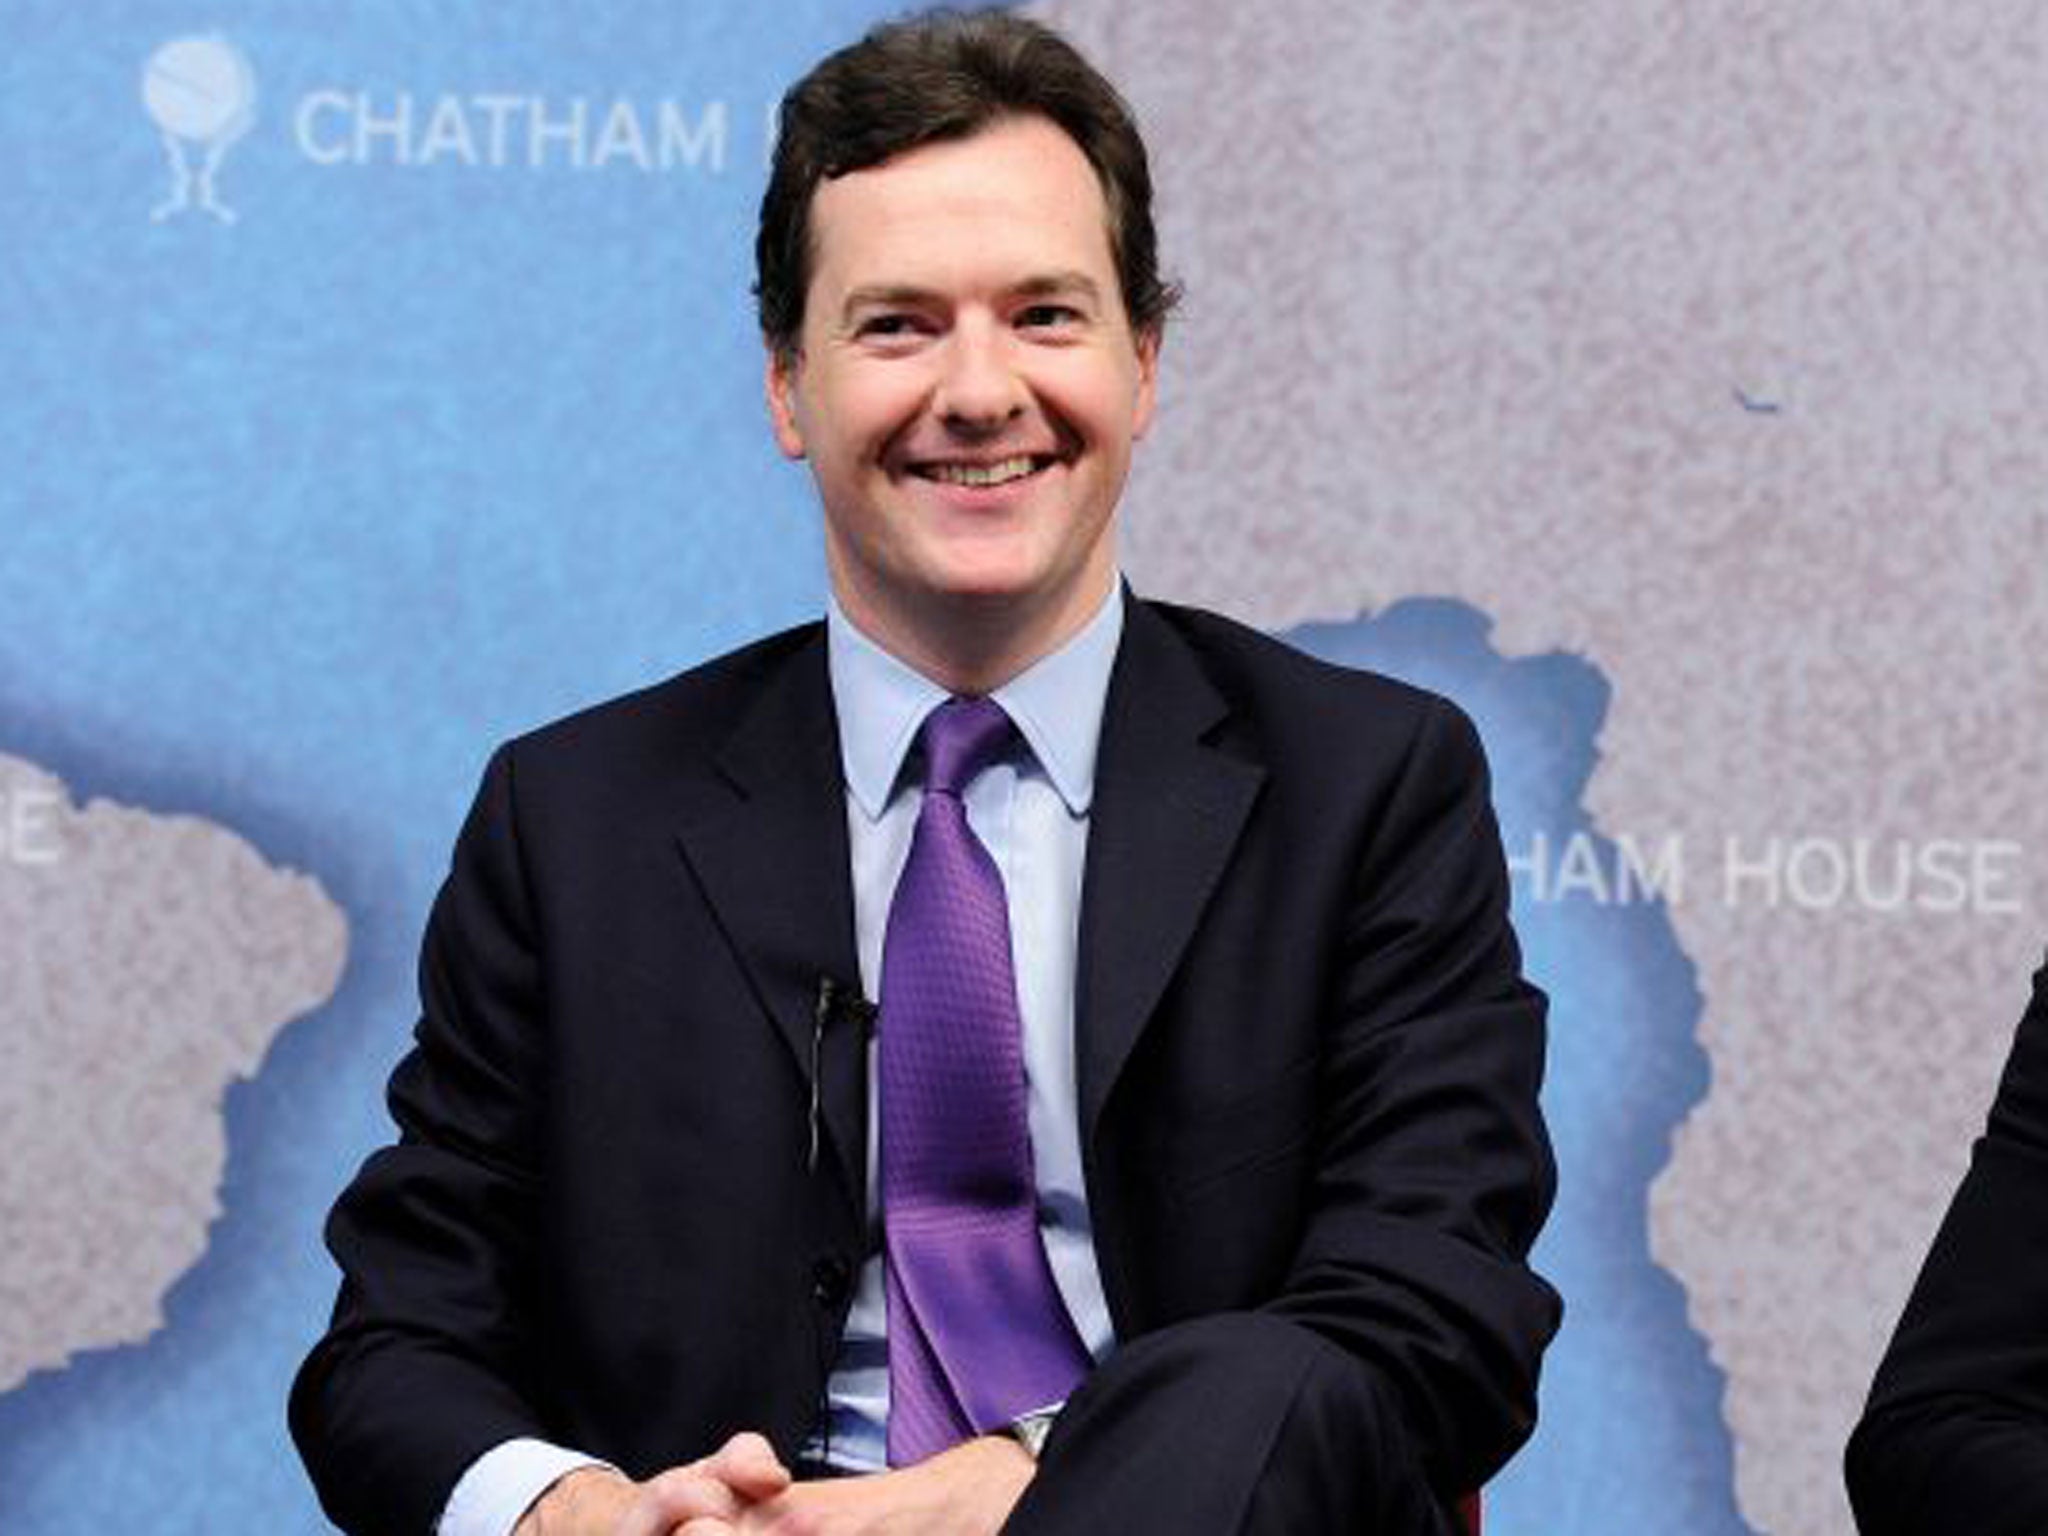 George Osborne is seeking public support for ditching the state's bank holdings